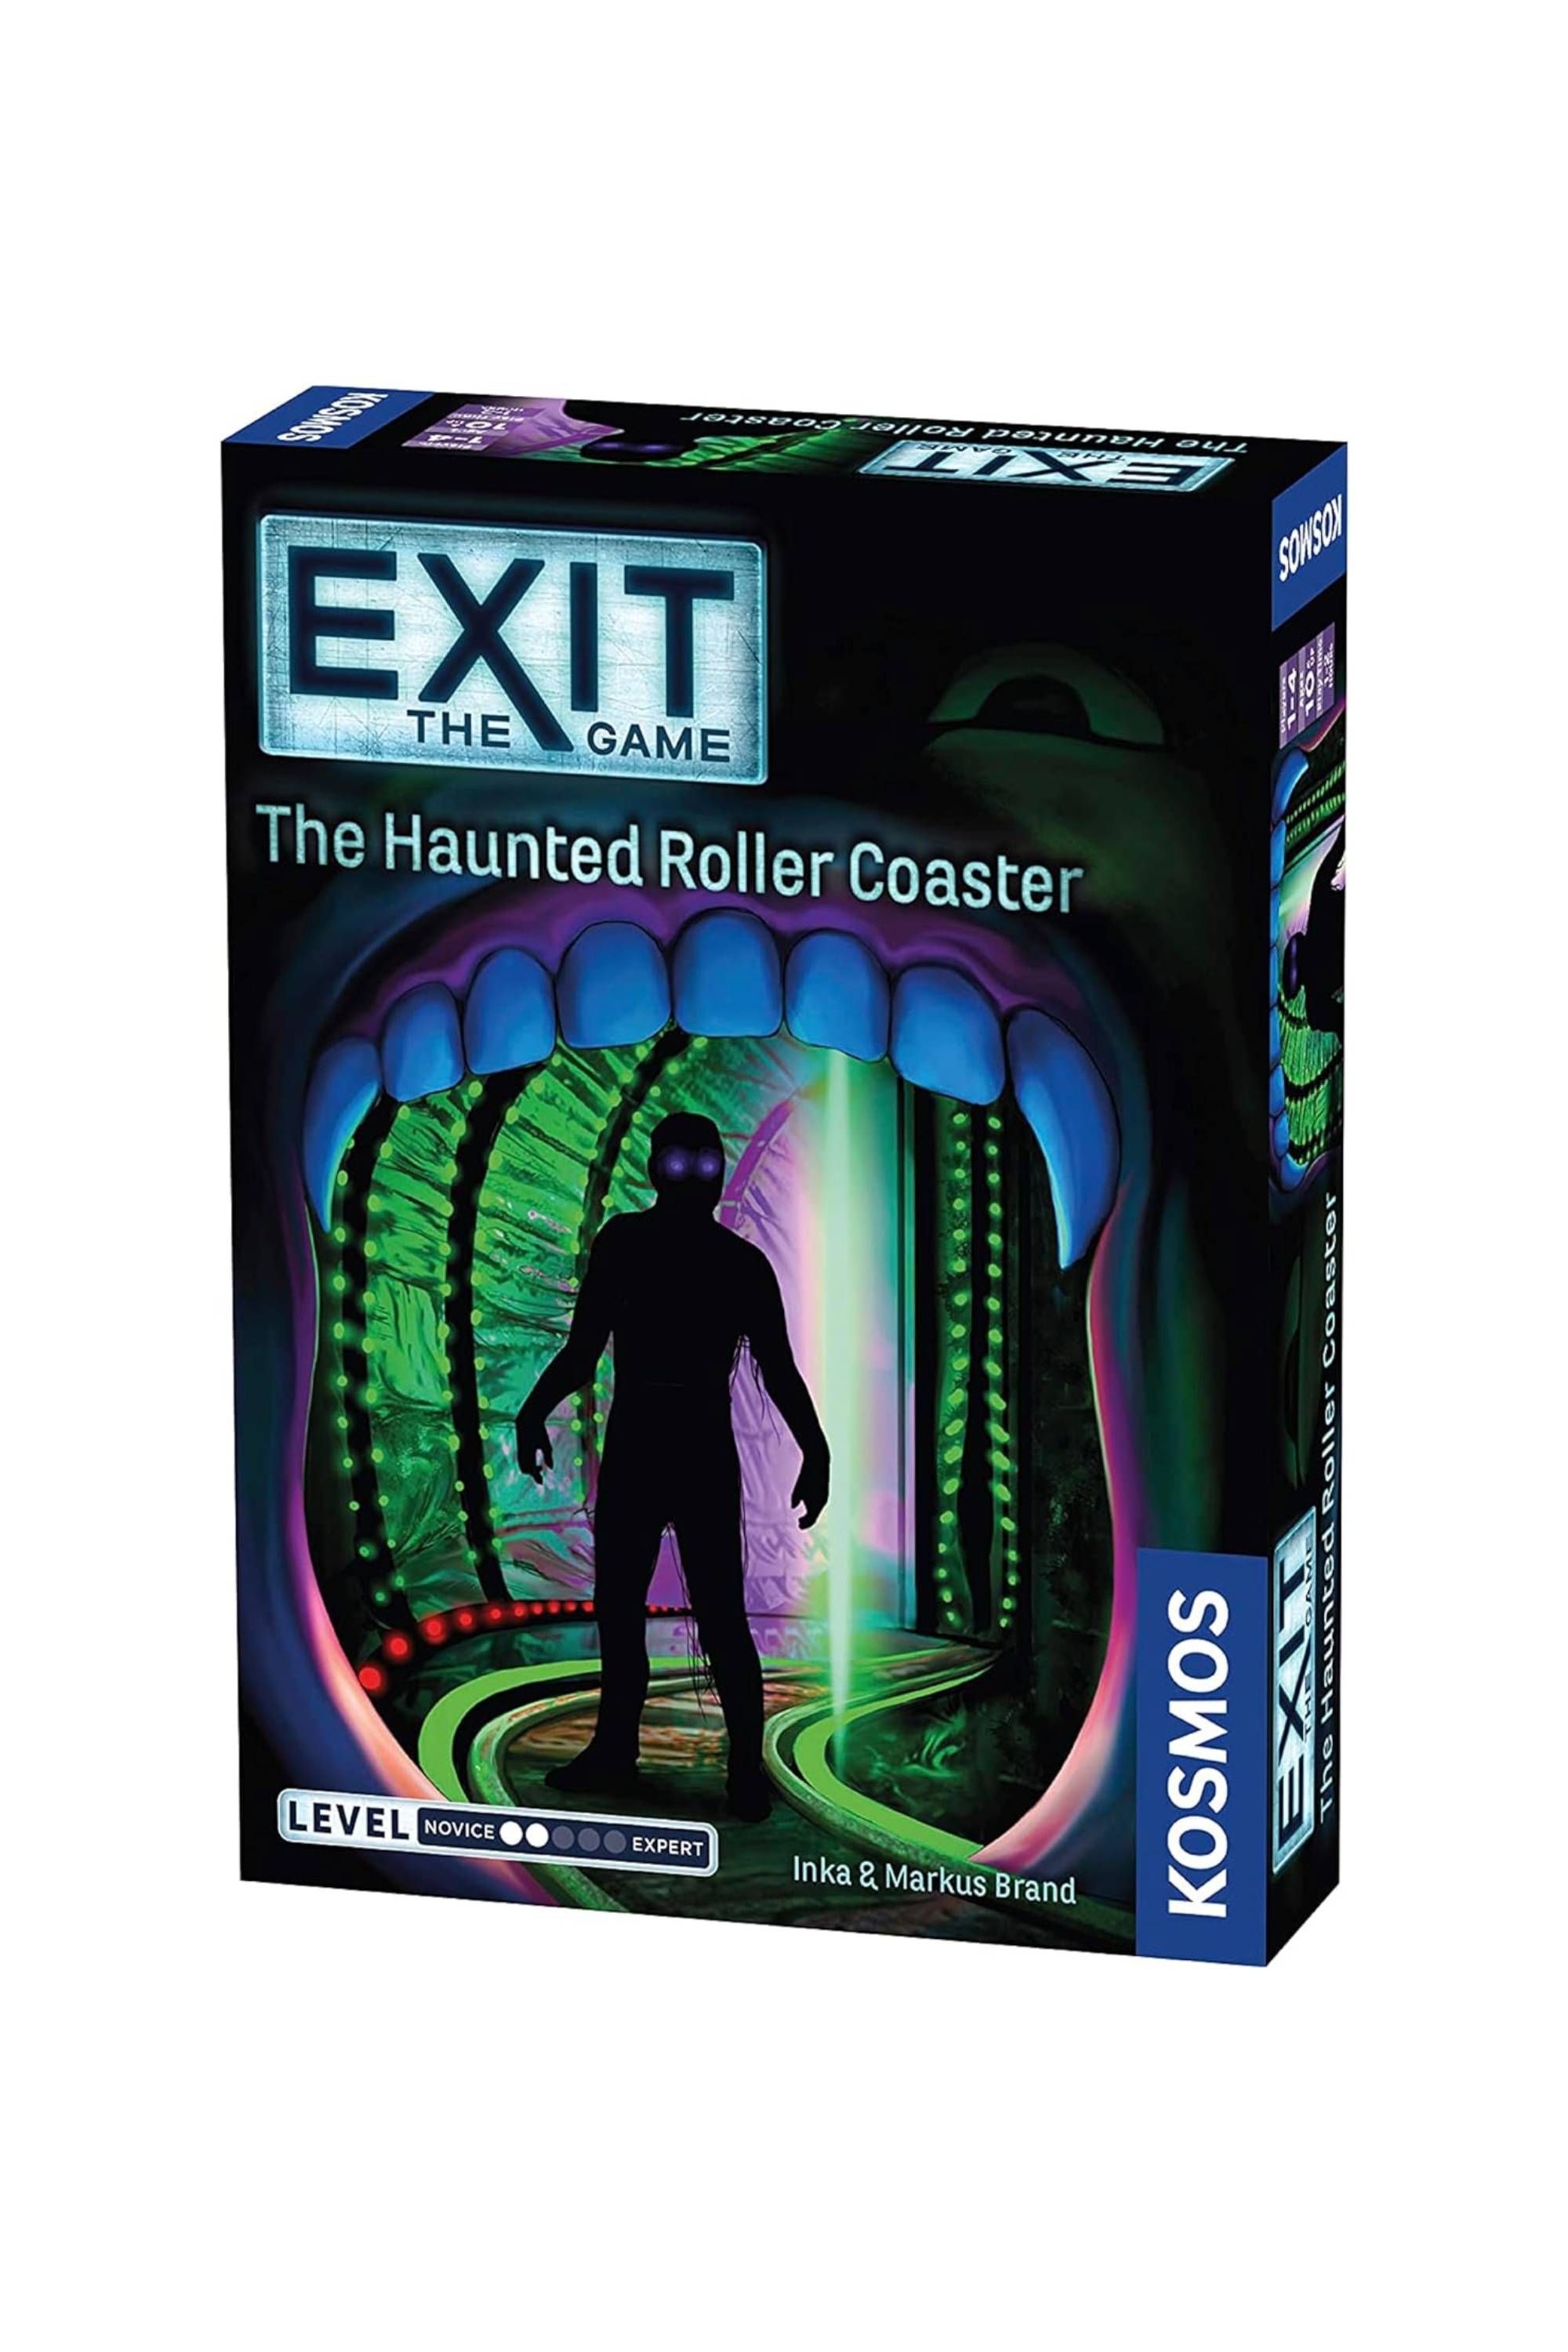 Exit - The Game - The Haunted Roller Coaster